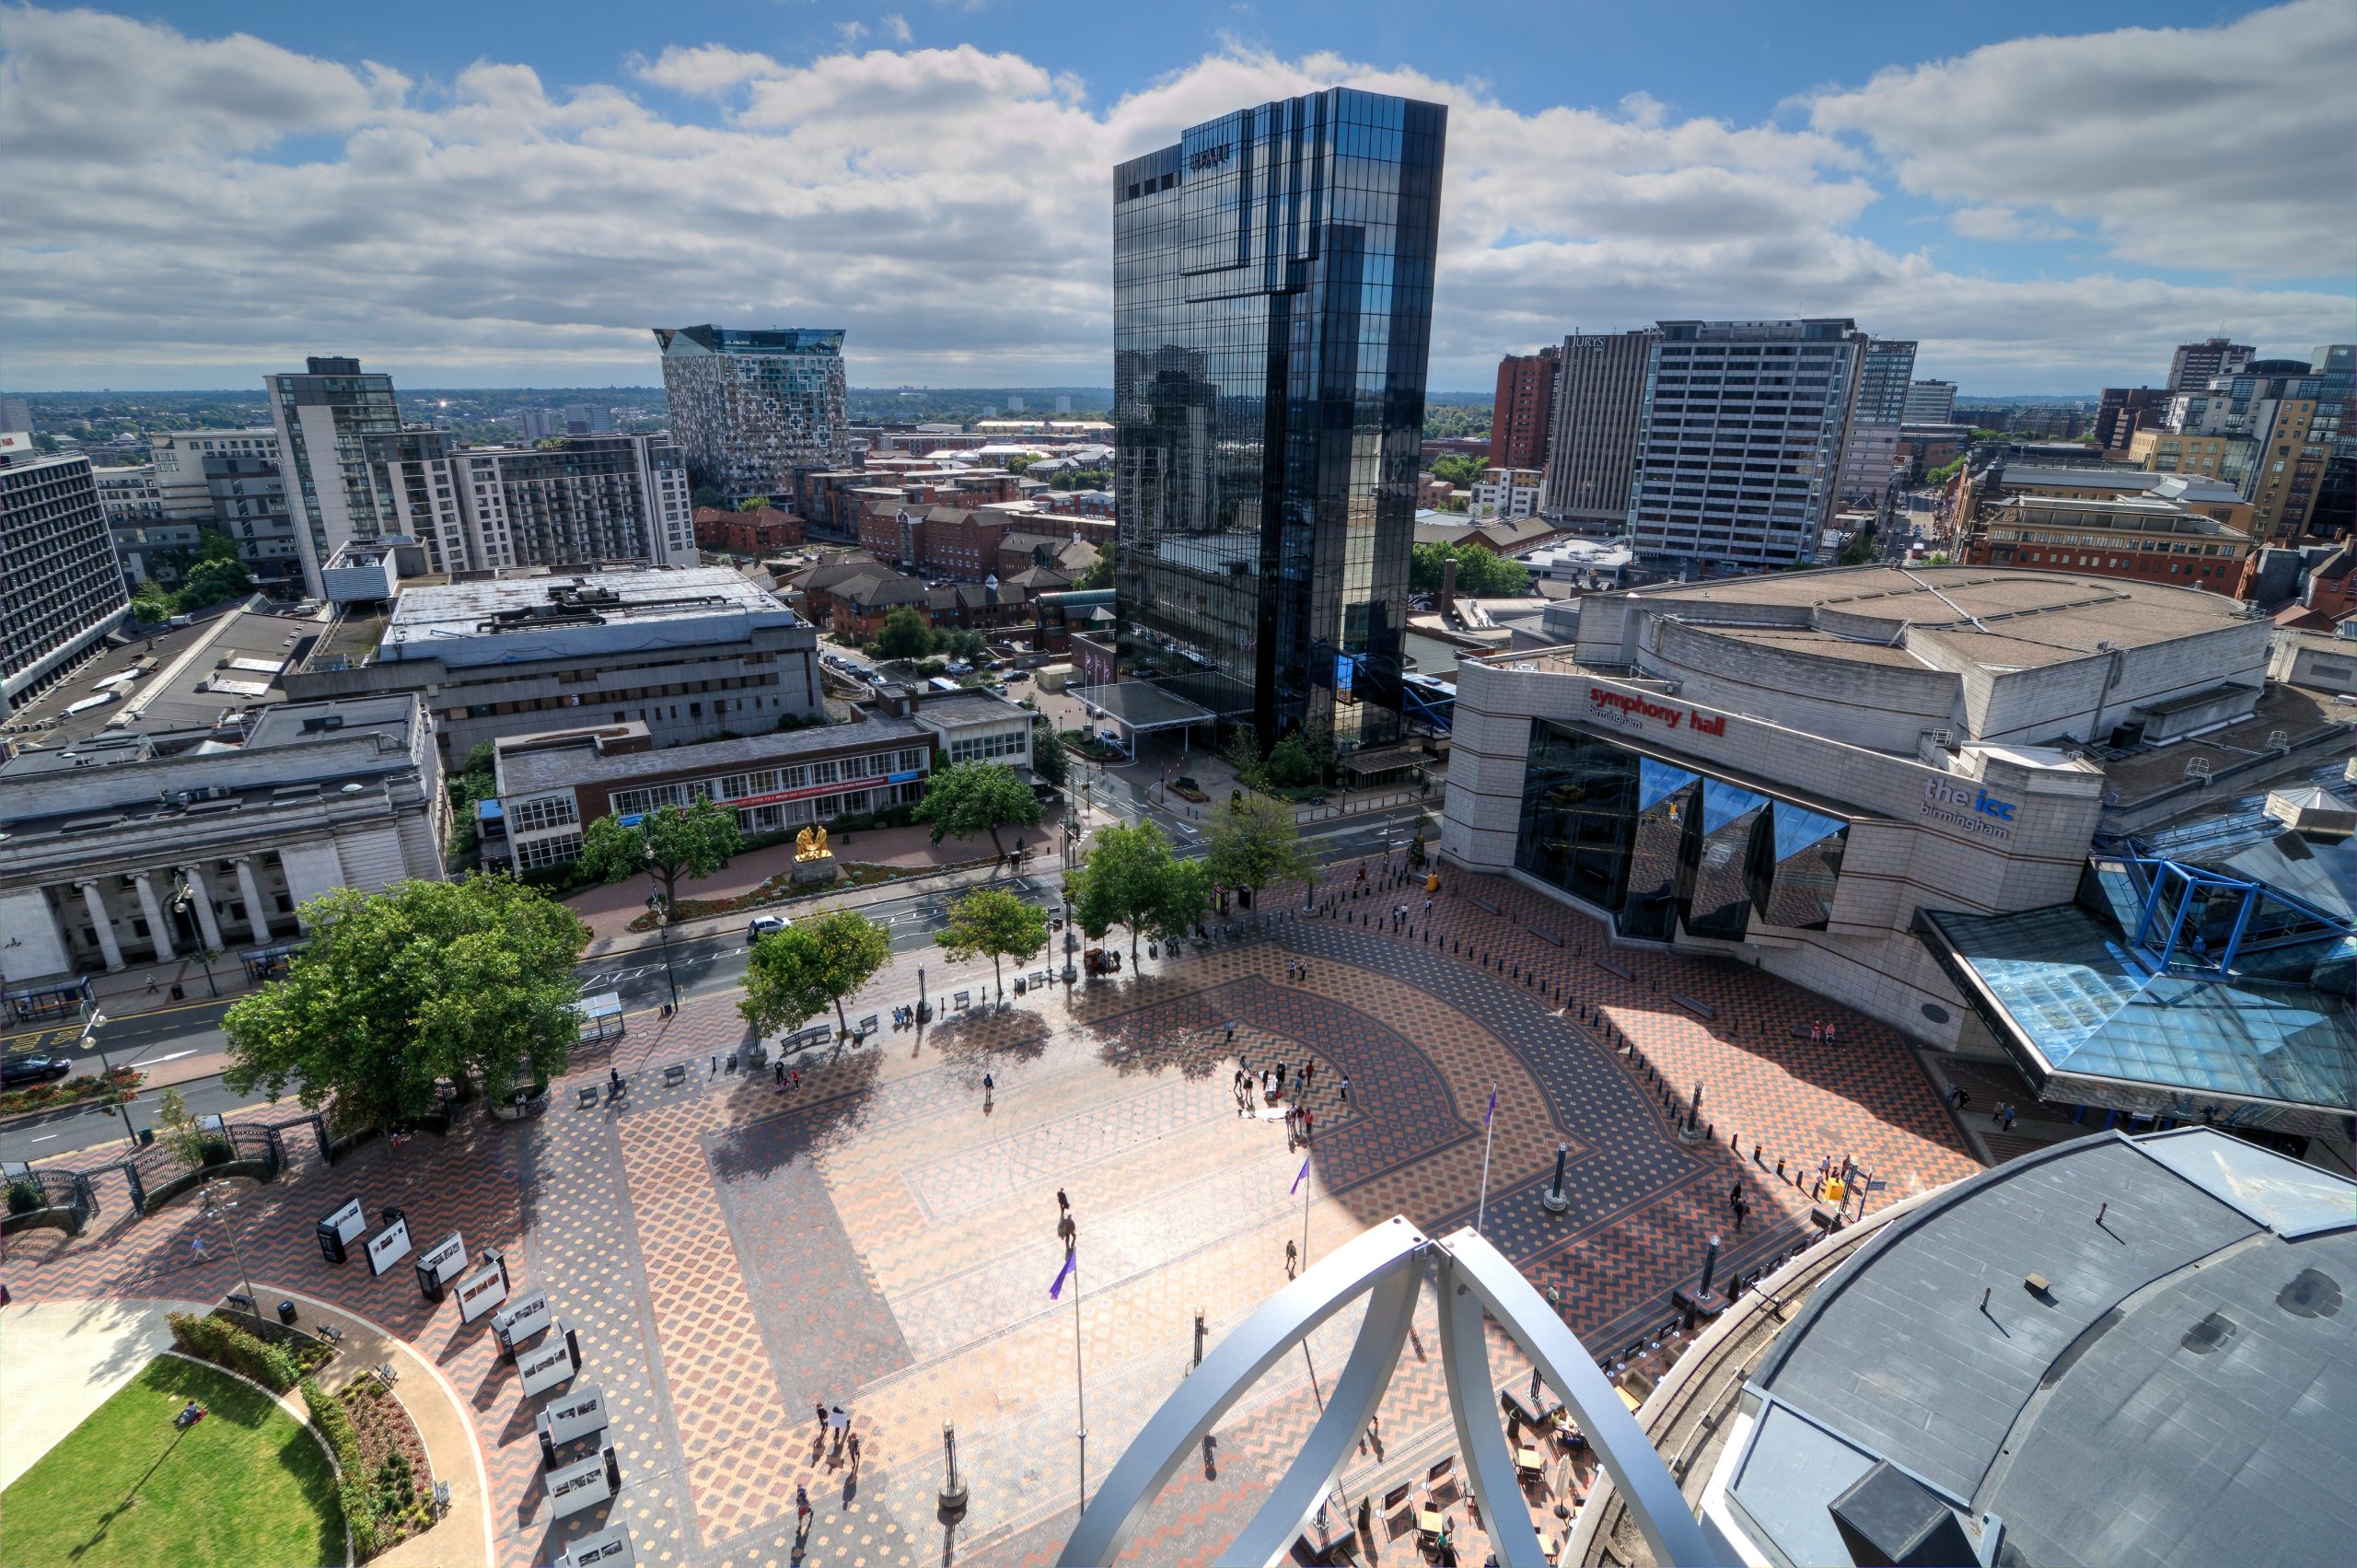 Elevated view of Centenary Square, Birmingham from the library, UK.